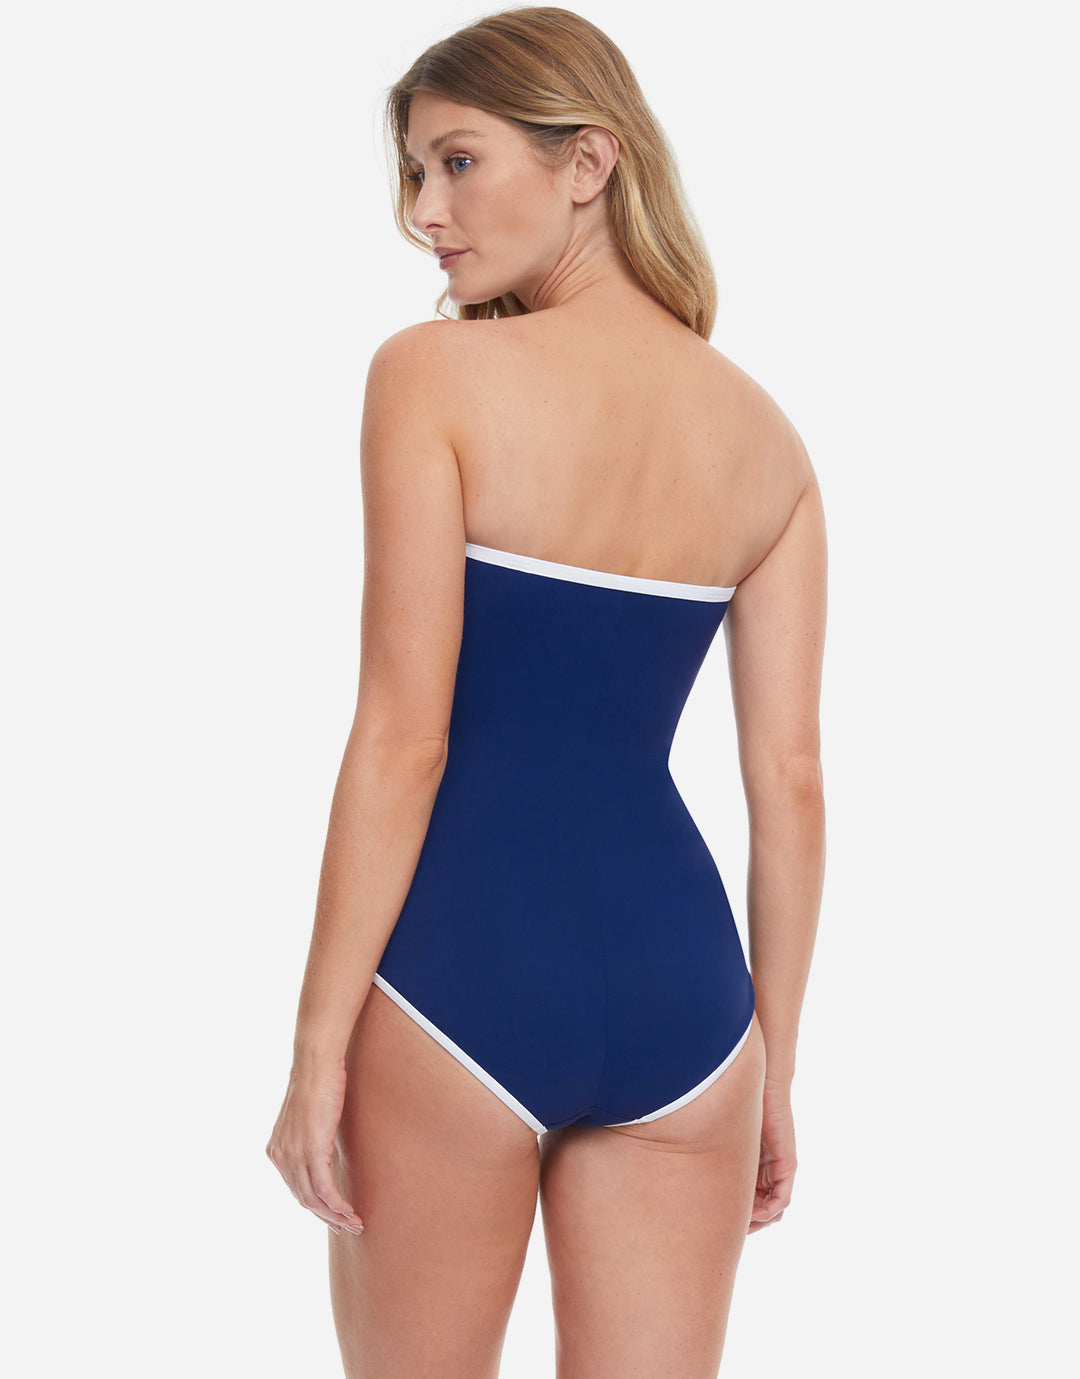 Sail to Sunsets Bandeau Swimsuit - Navy - Simply Beach UK